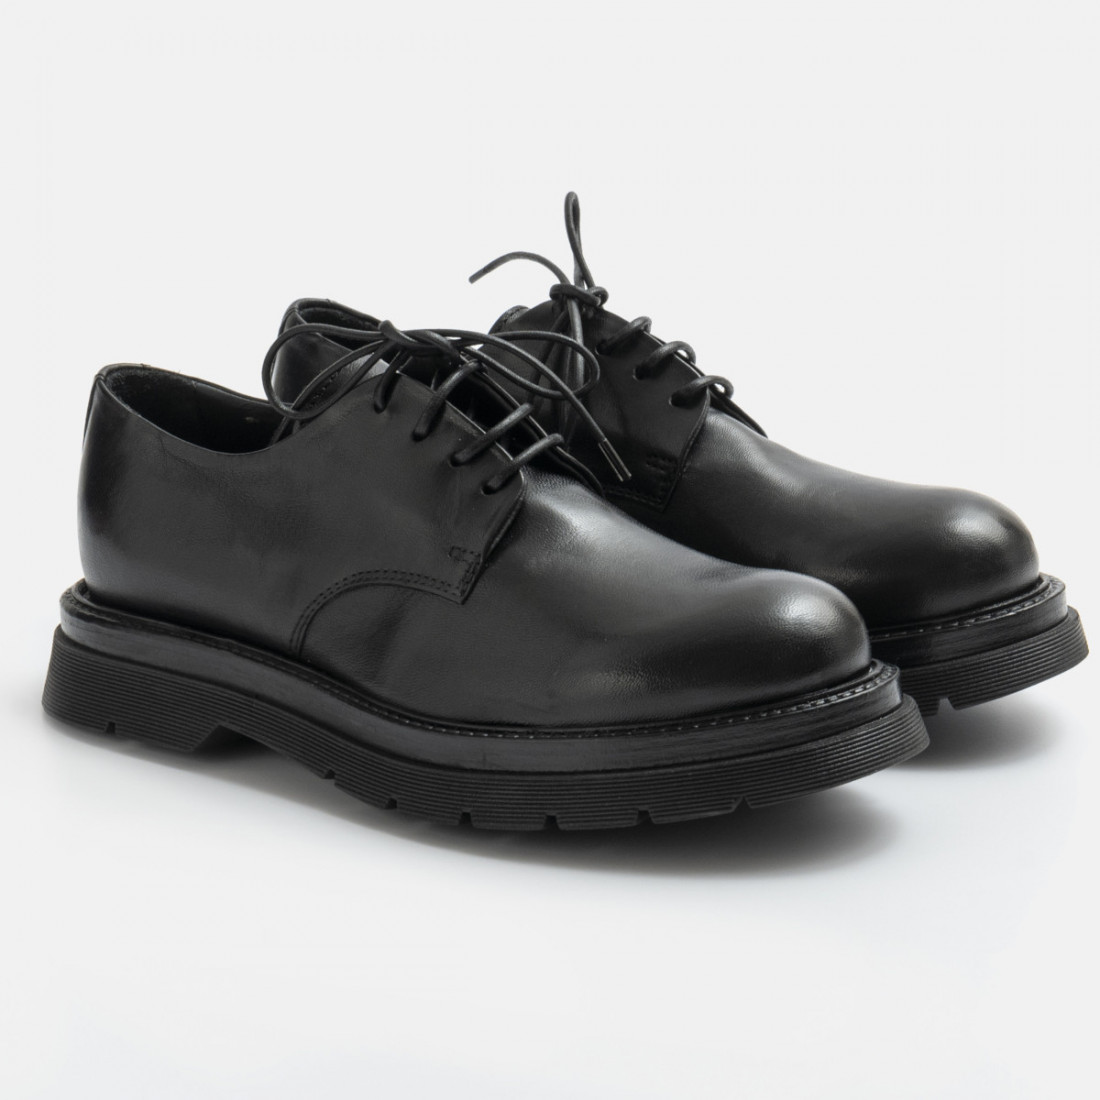 Vicolo 8 by Dolani derby shoe in black leather